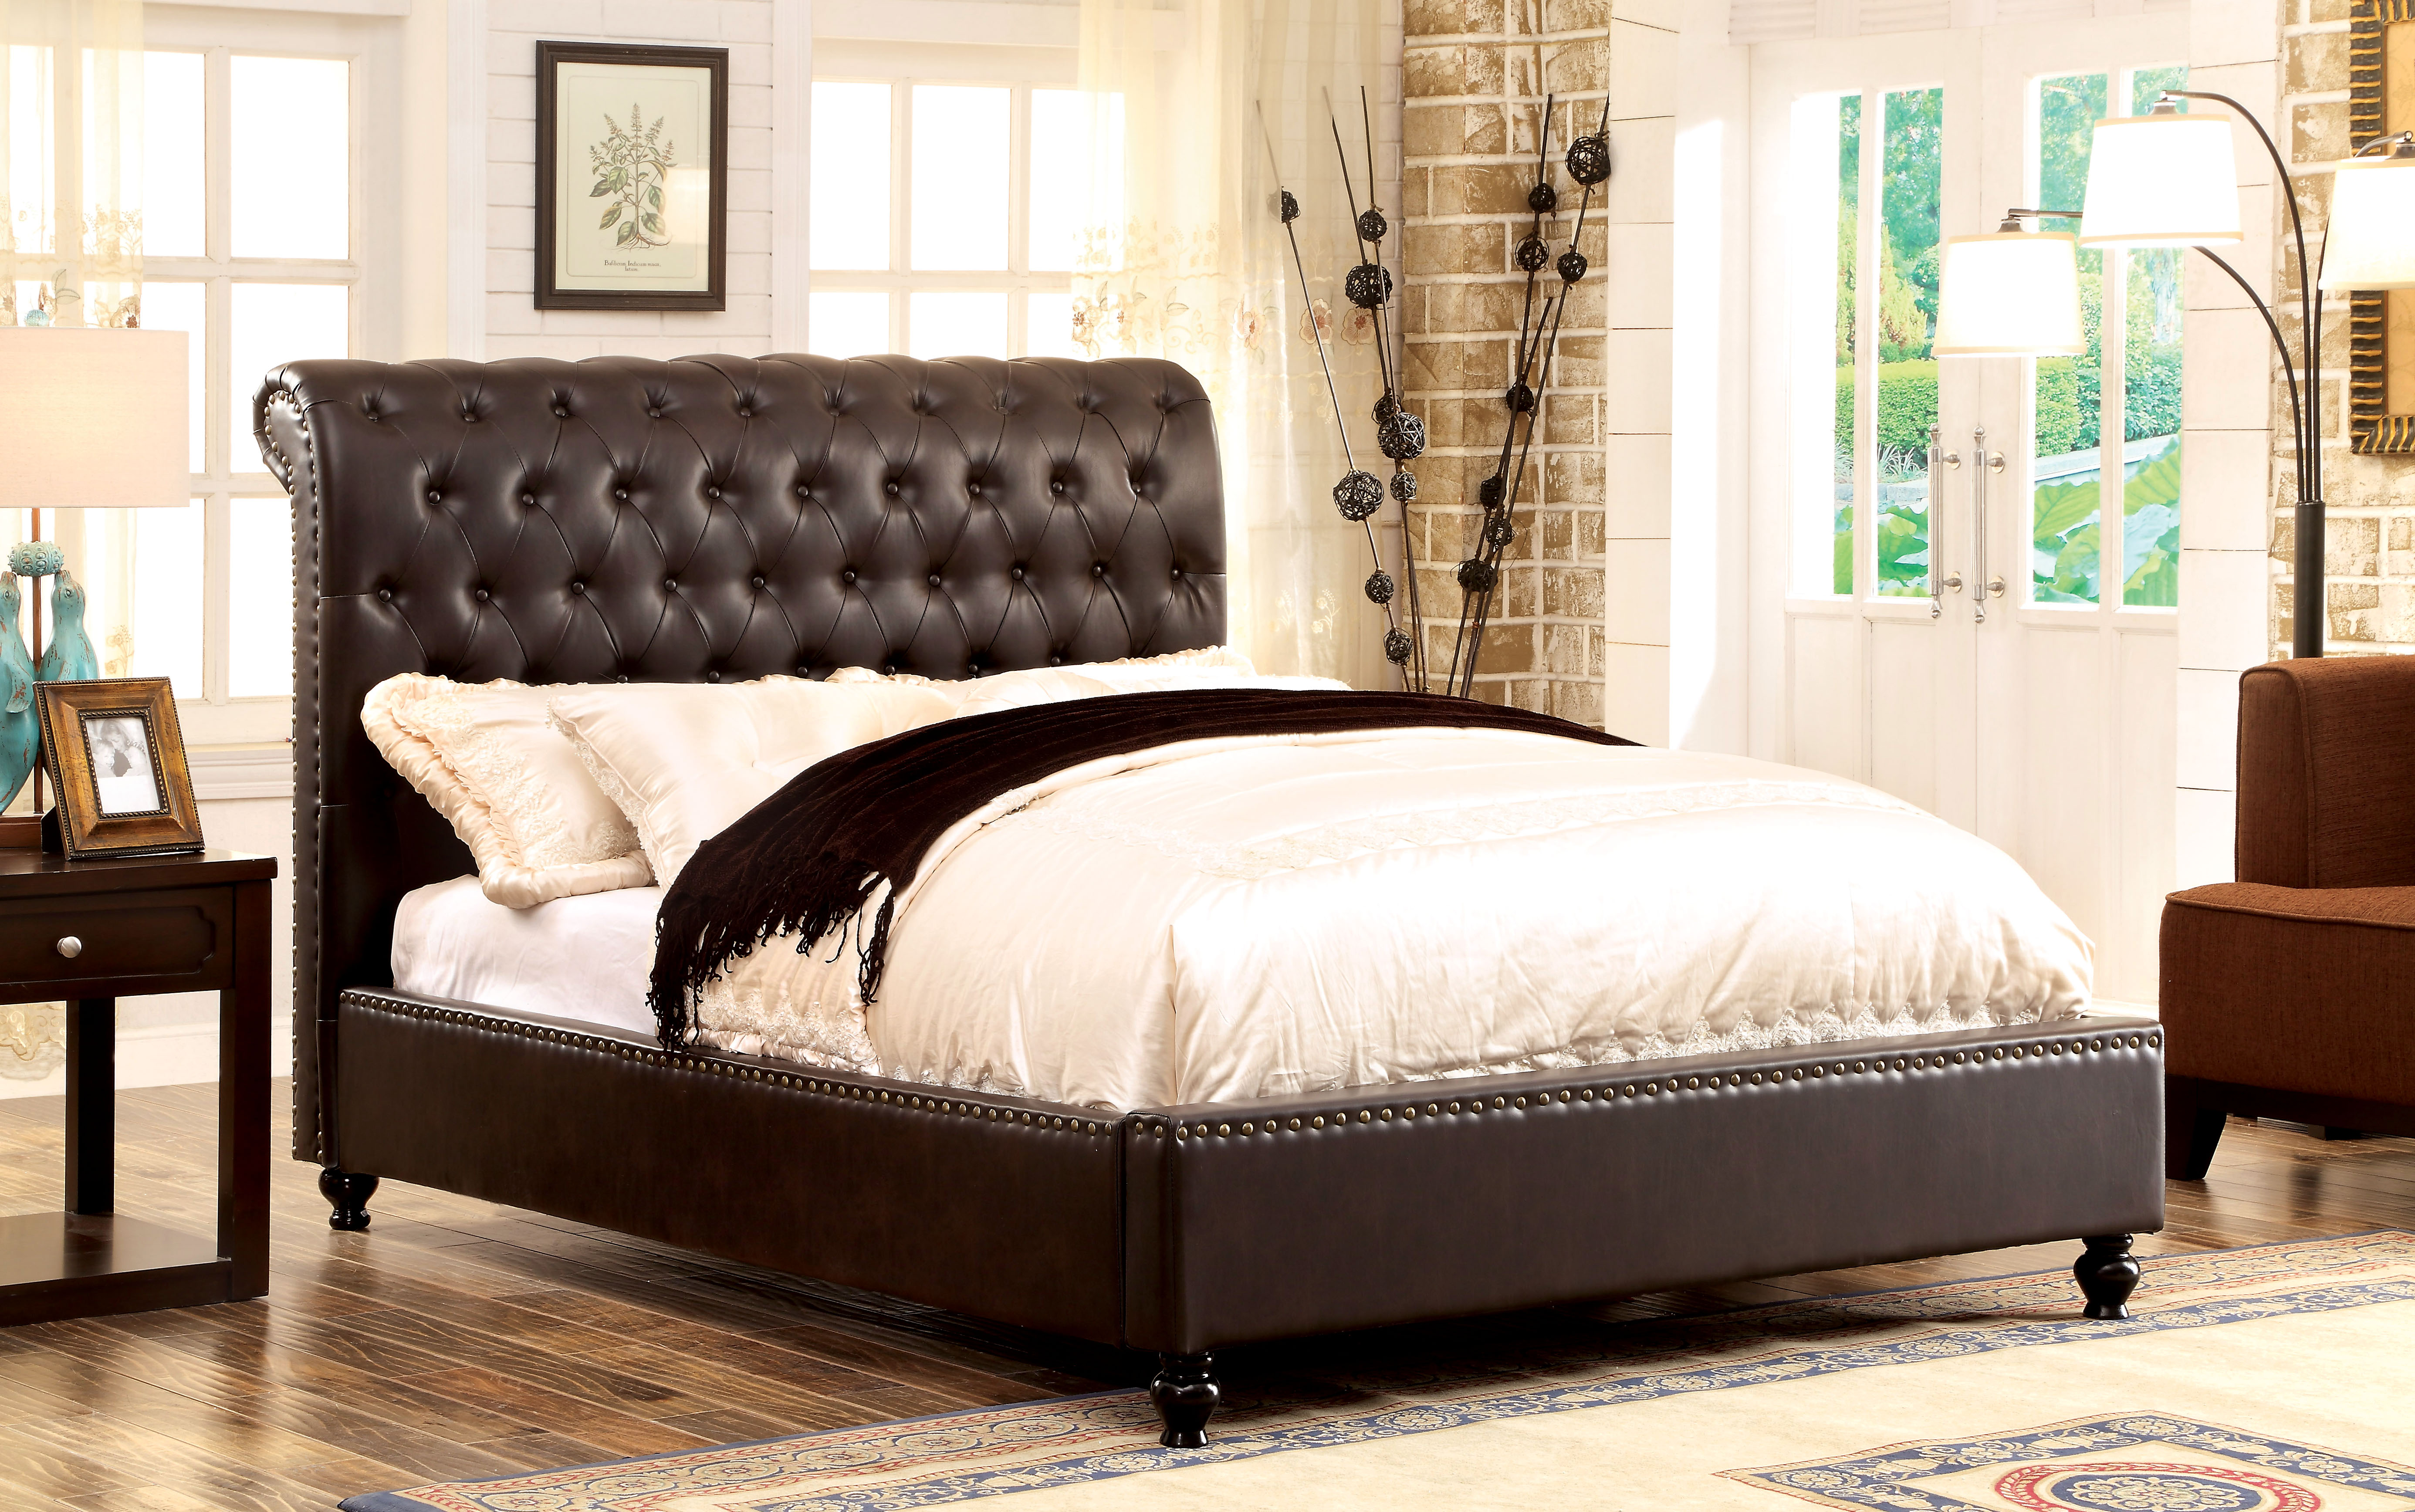 Furniture of America Reina Button Tufted Leatherette Platform Bed